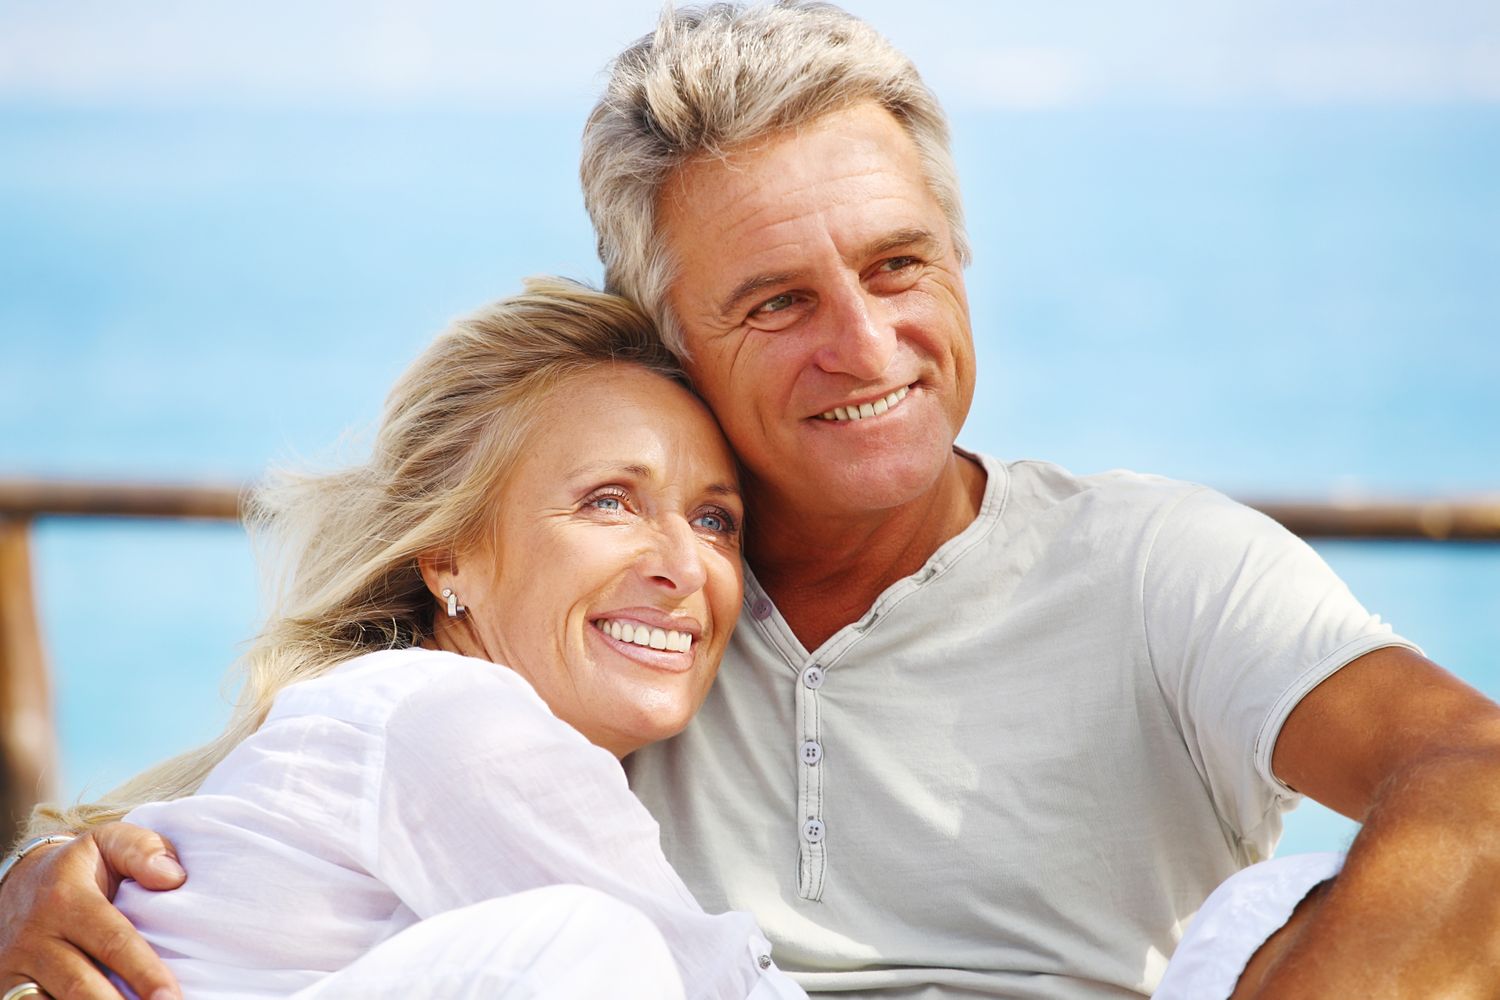 We offer customized hormone treatment plans for both men and women.